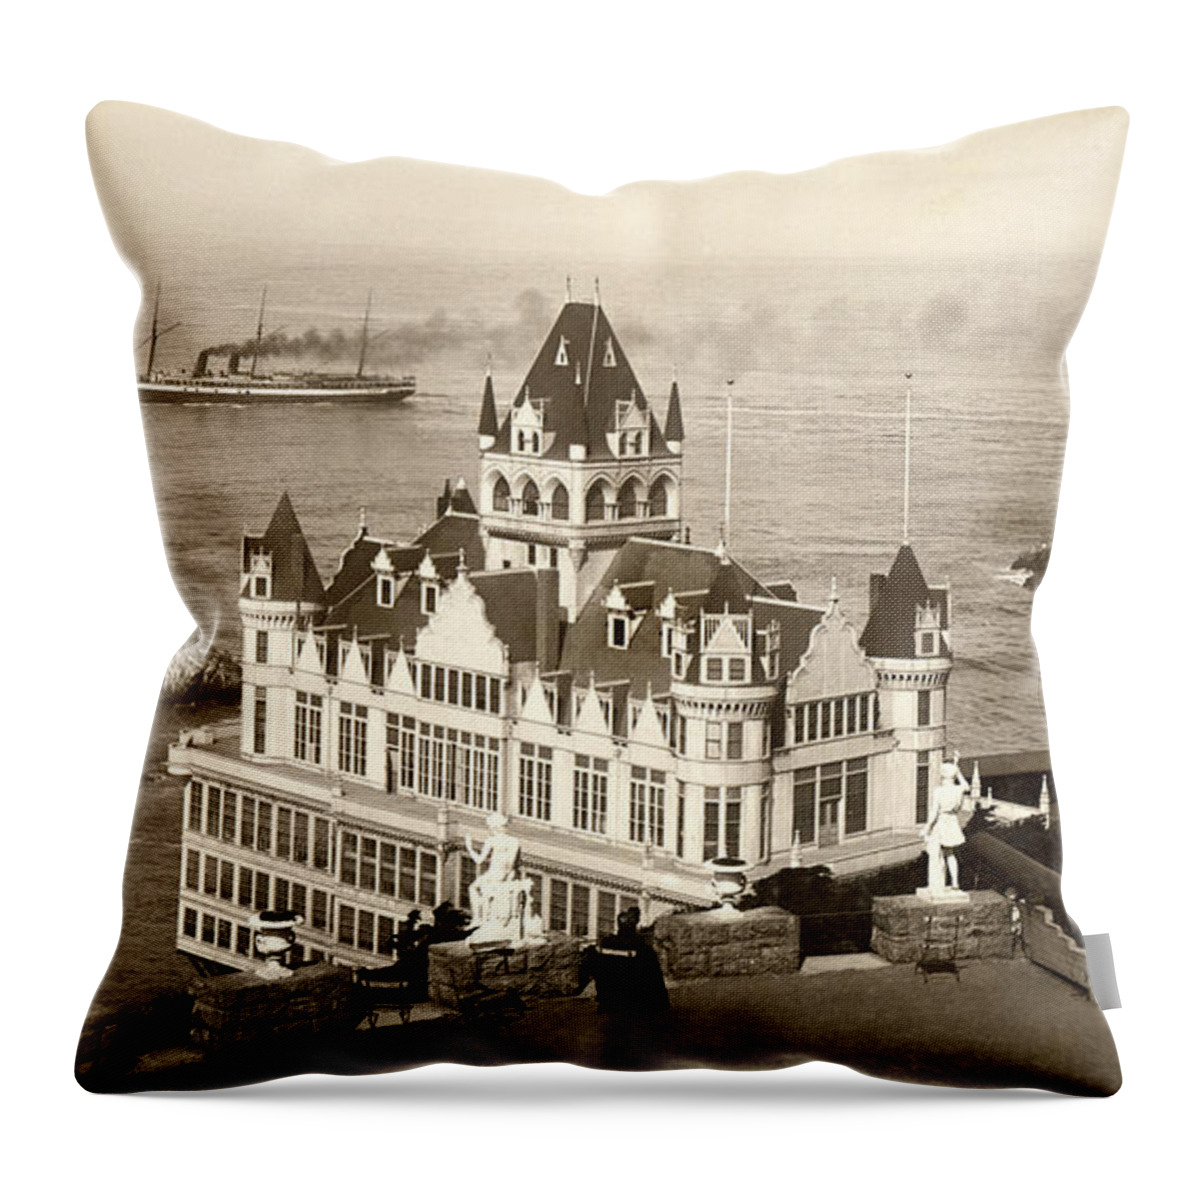 B And W Throw Pillow featuring the photograph San Francisco Cliff House #1 by Underwood Archives